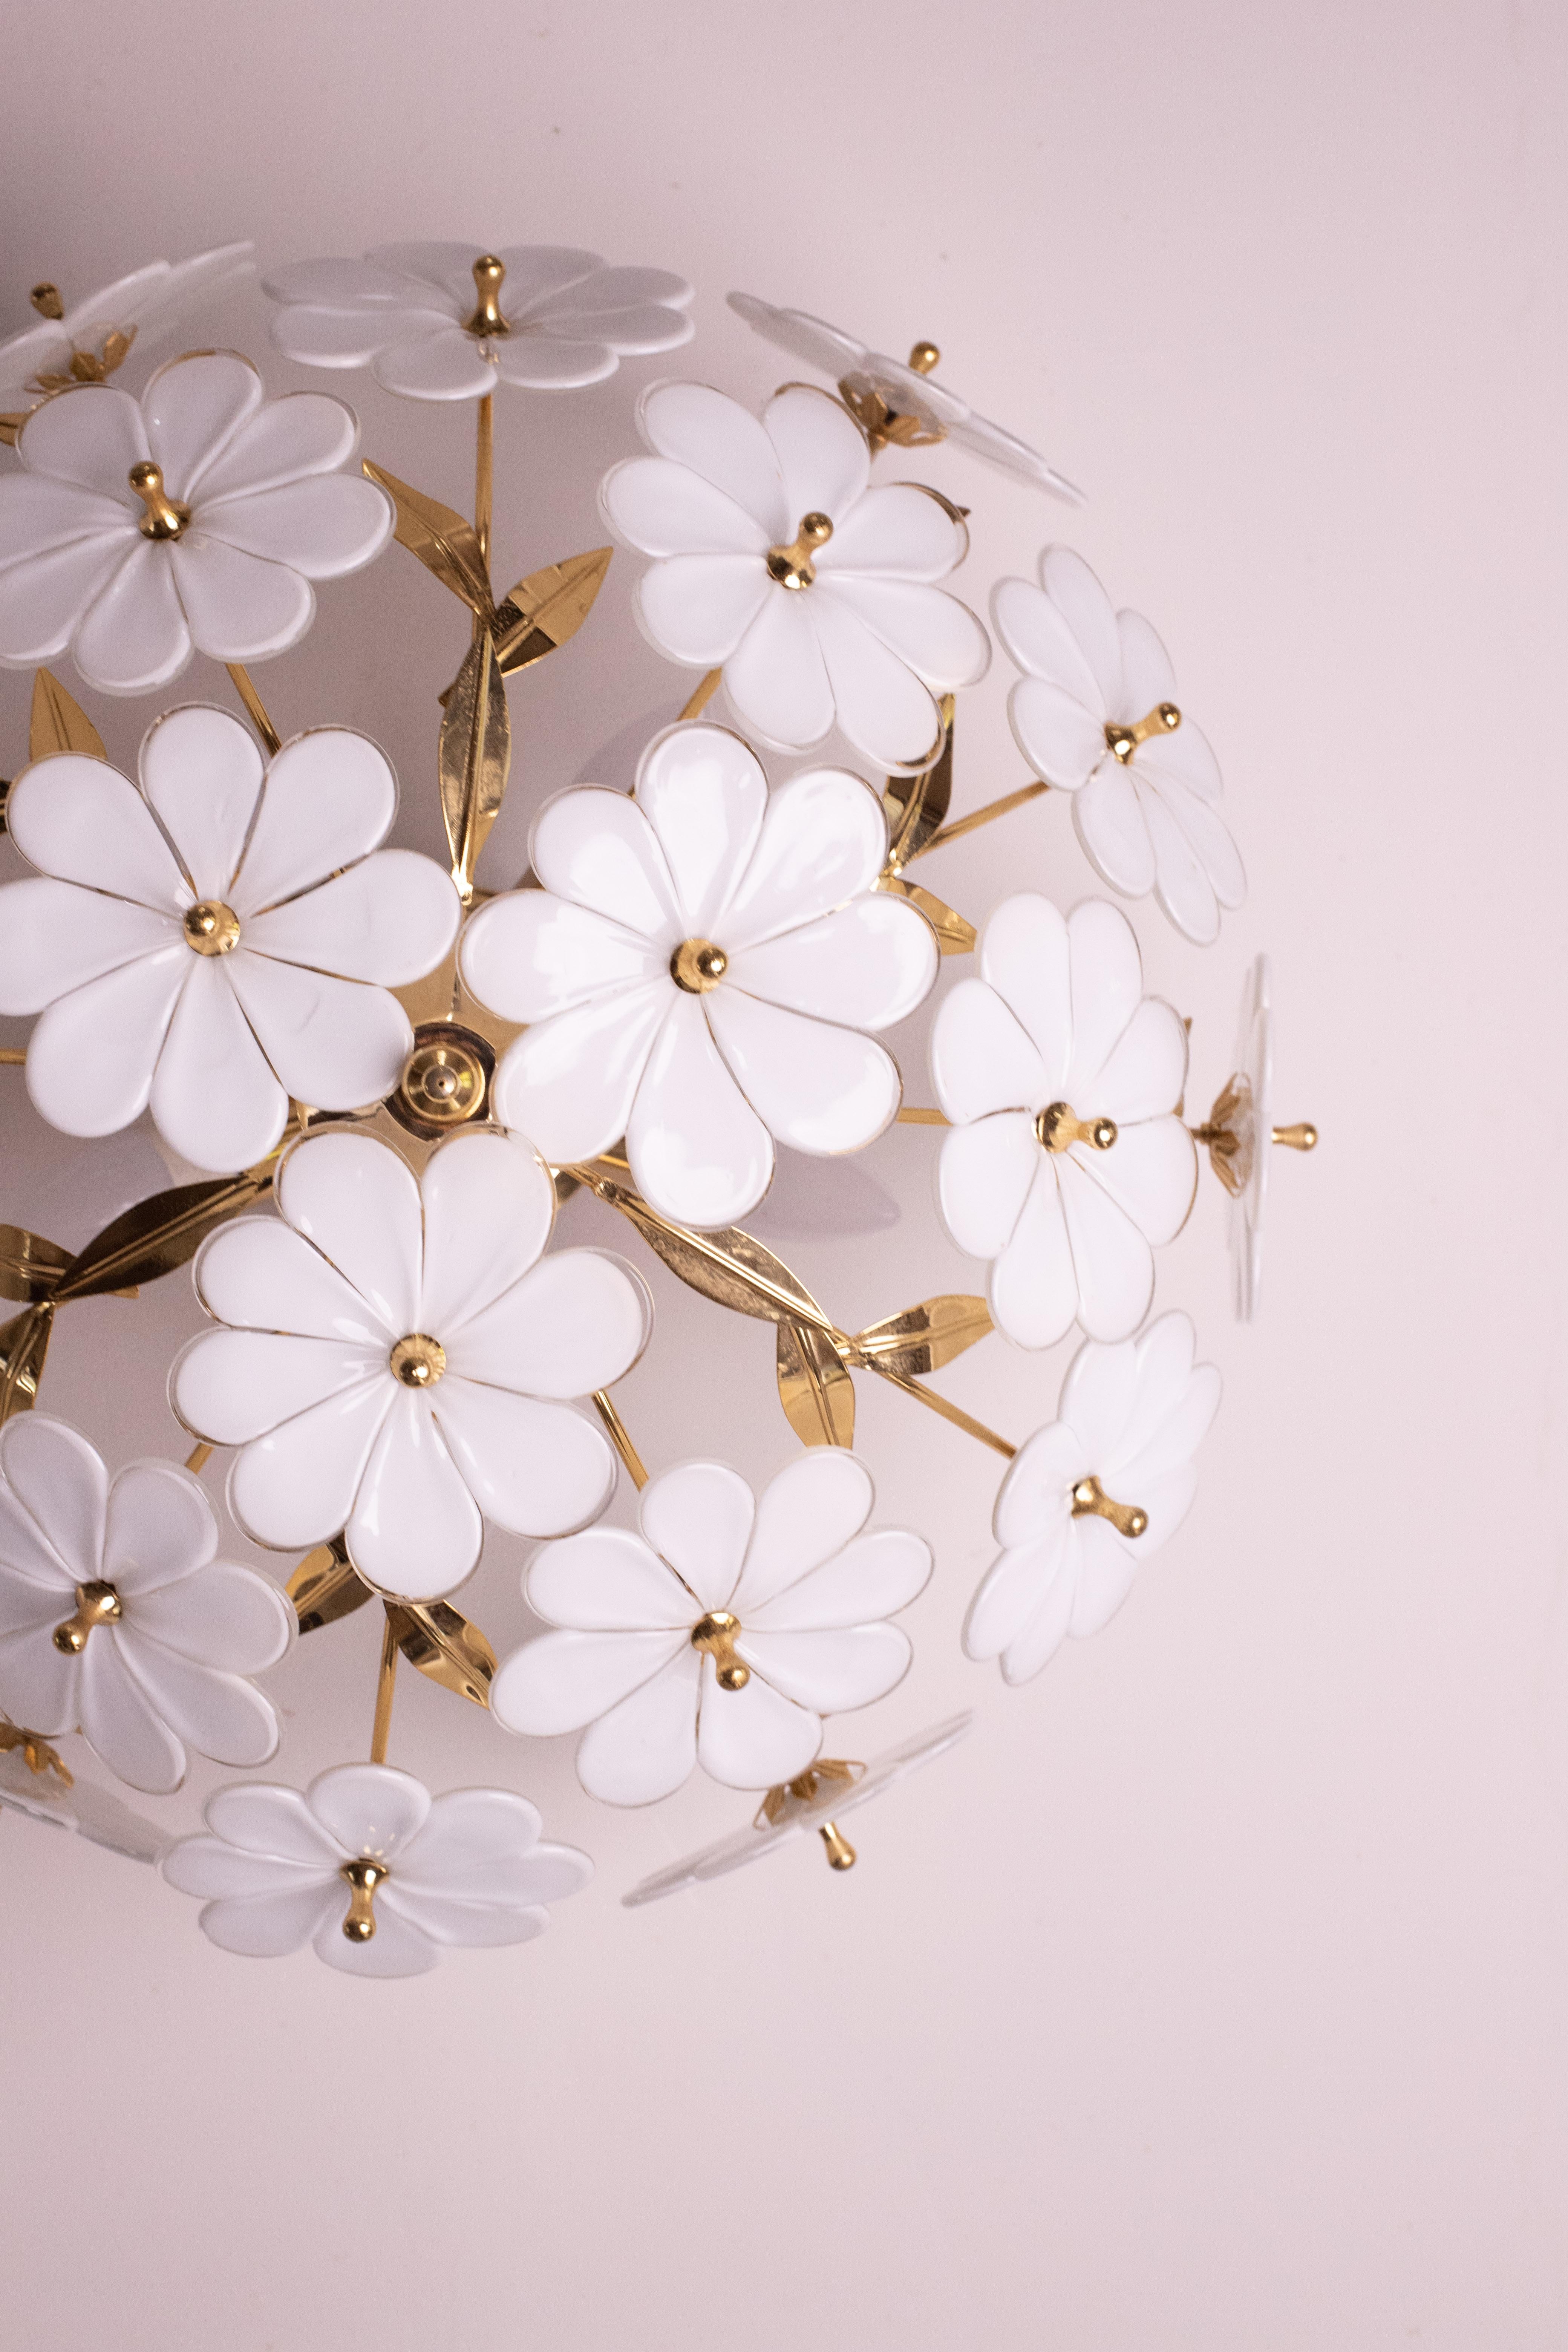 Vintage Murano glass chandelier full of white flowers.
The chandelier has 5 light points with E14 connection.
The structure is in gold bath in good vintage condition.
The height of the chandelier is 30 cm, the diameter is 55.